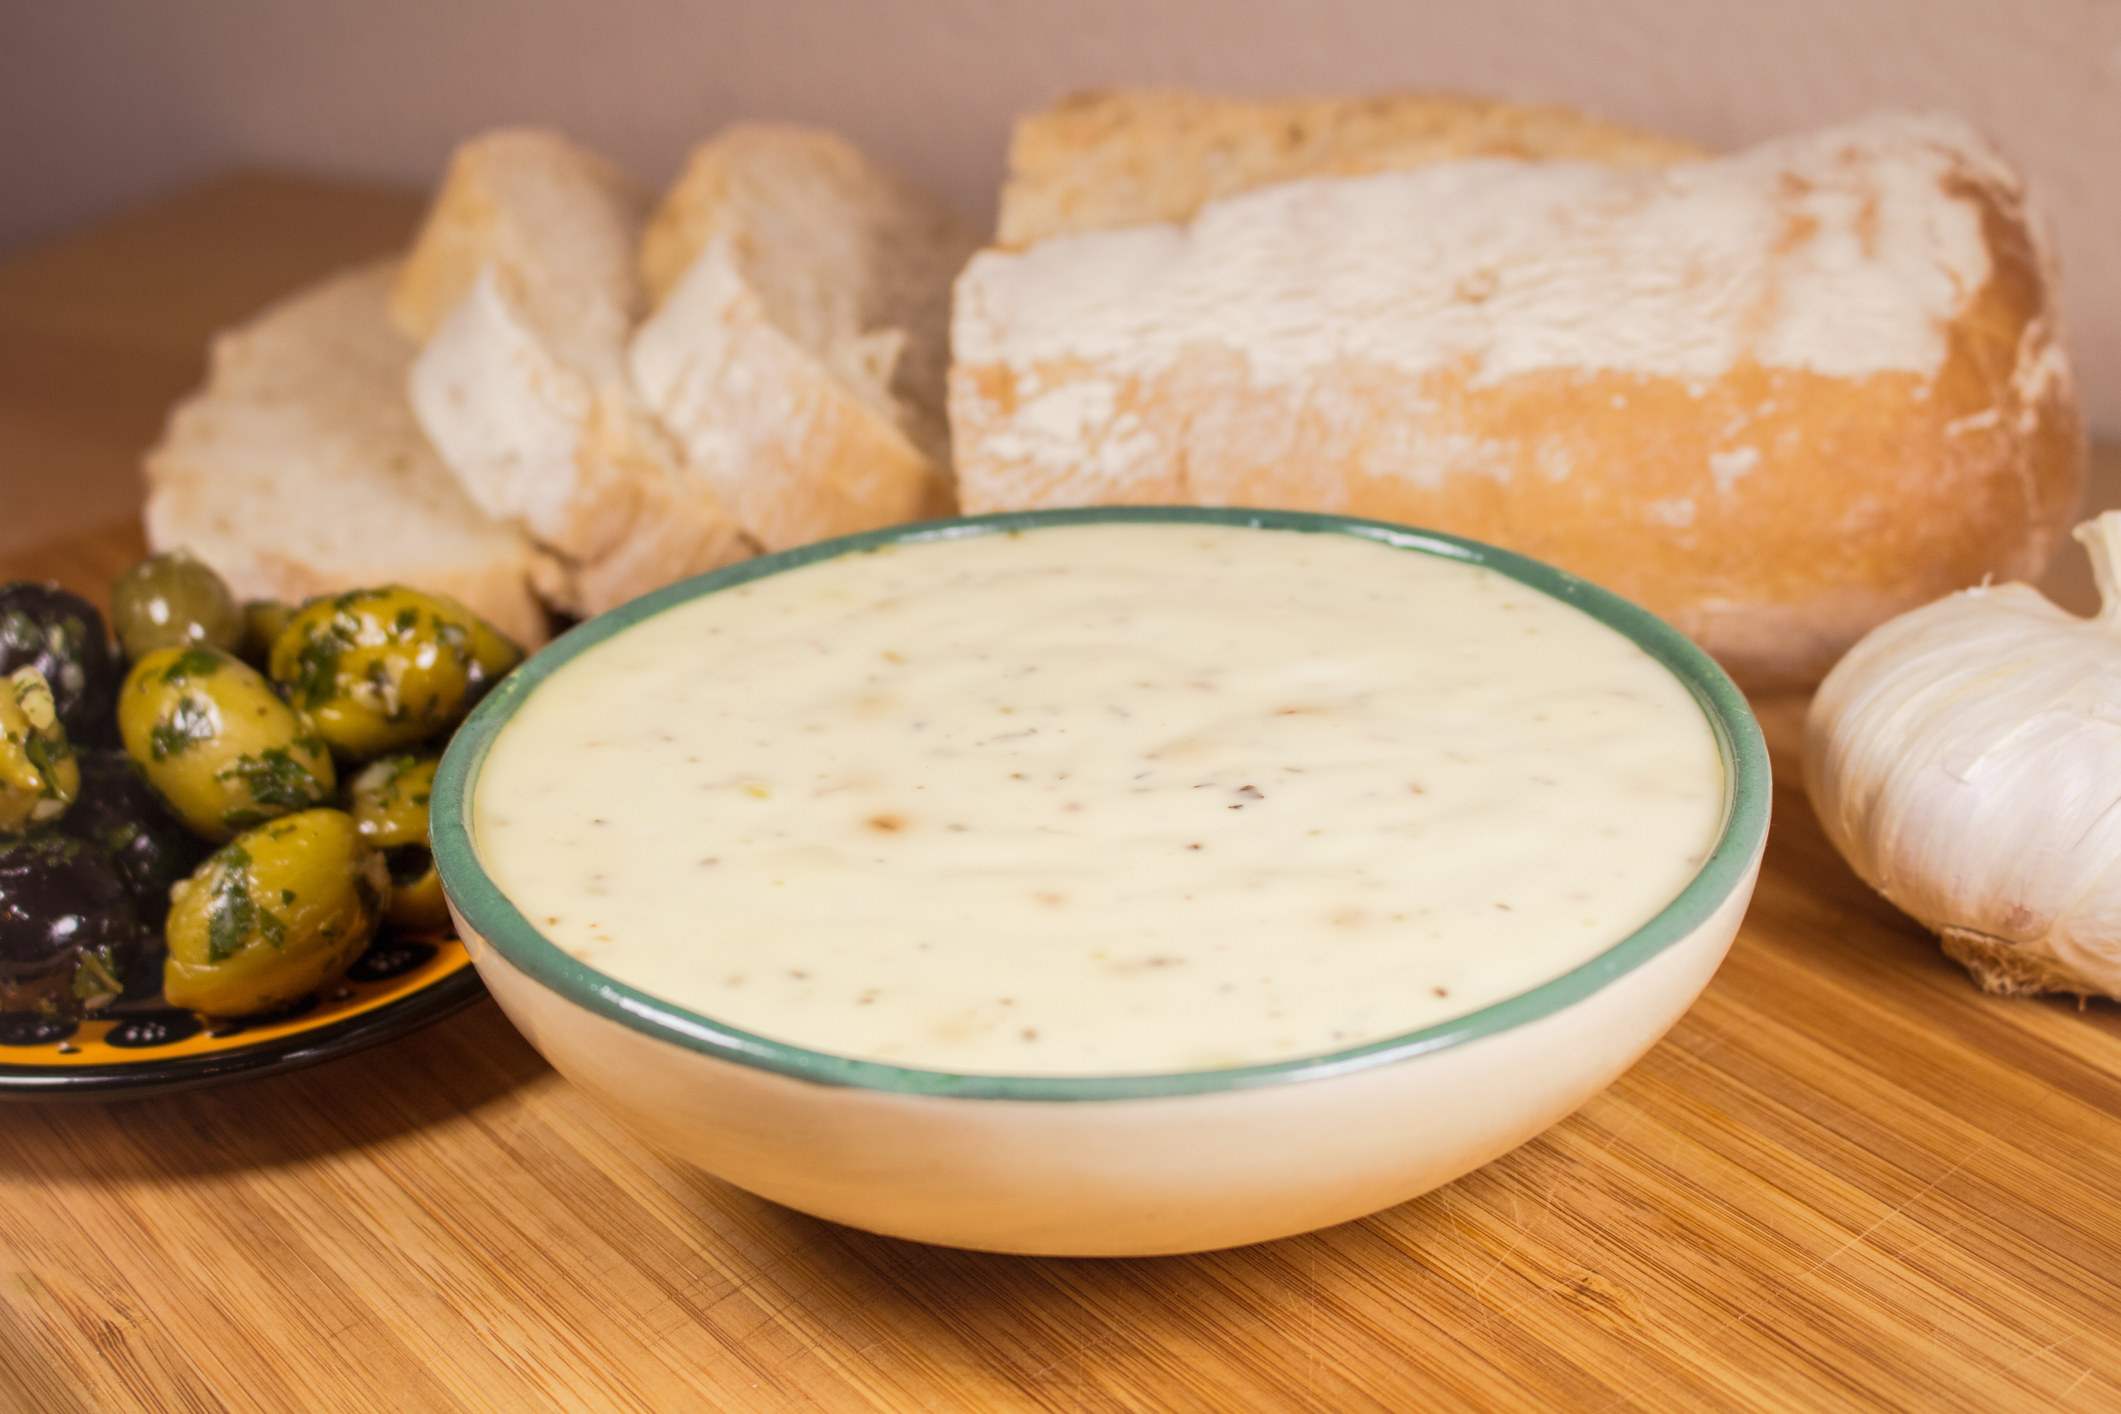 Homemade aioli in a bowl with bread and olives.